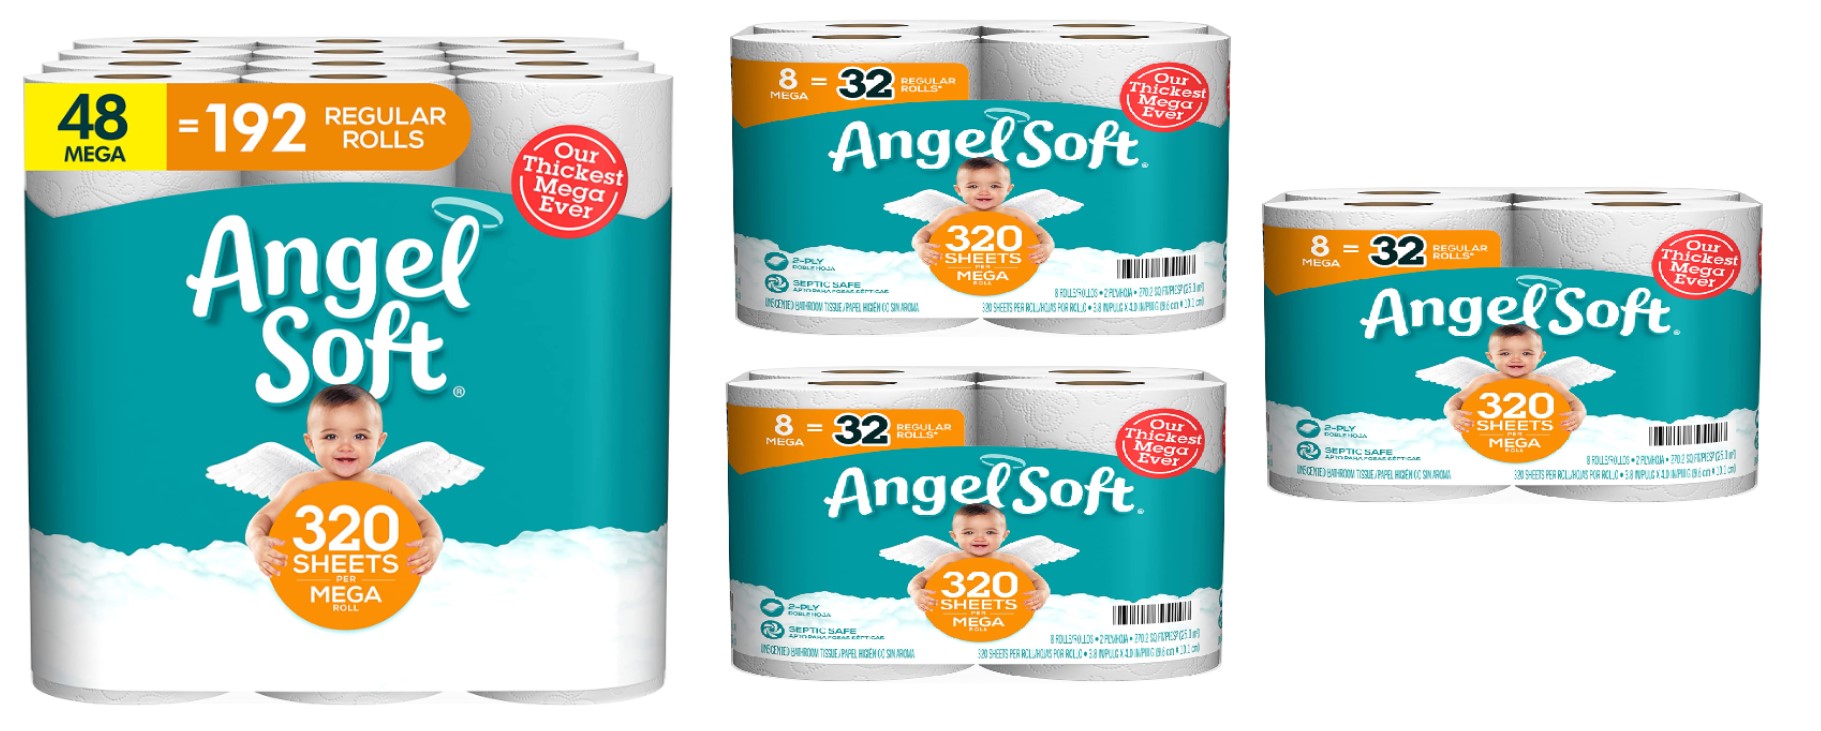 72-Count Angel Soft 2-Ply Mega Rolls Toilet Paper $50.97 + $15 Amazon Credit & More + Free shipping